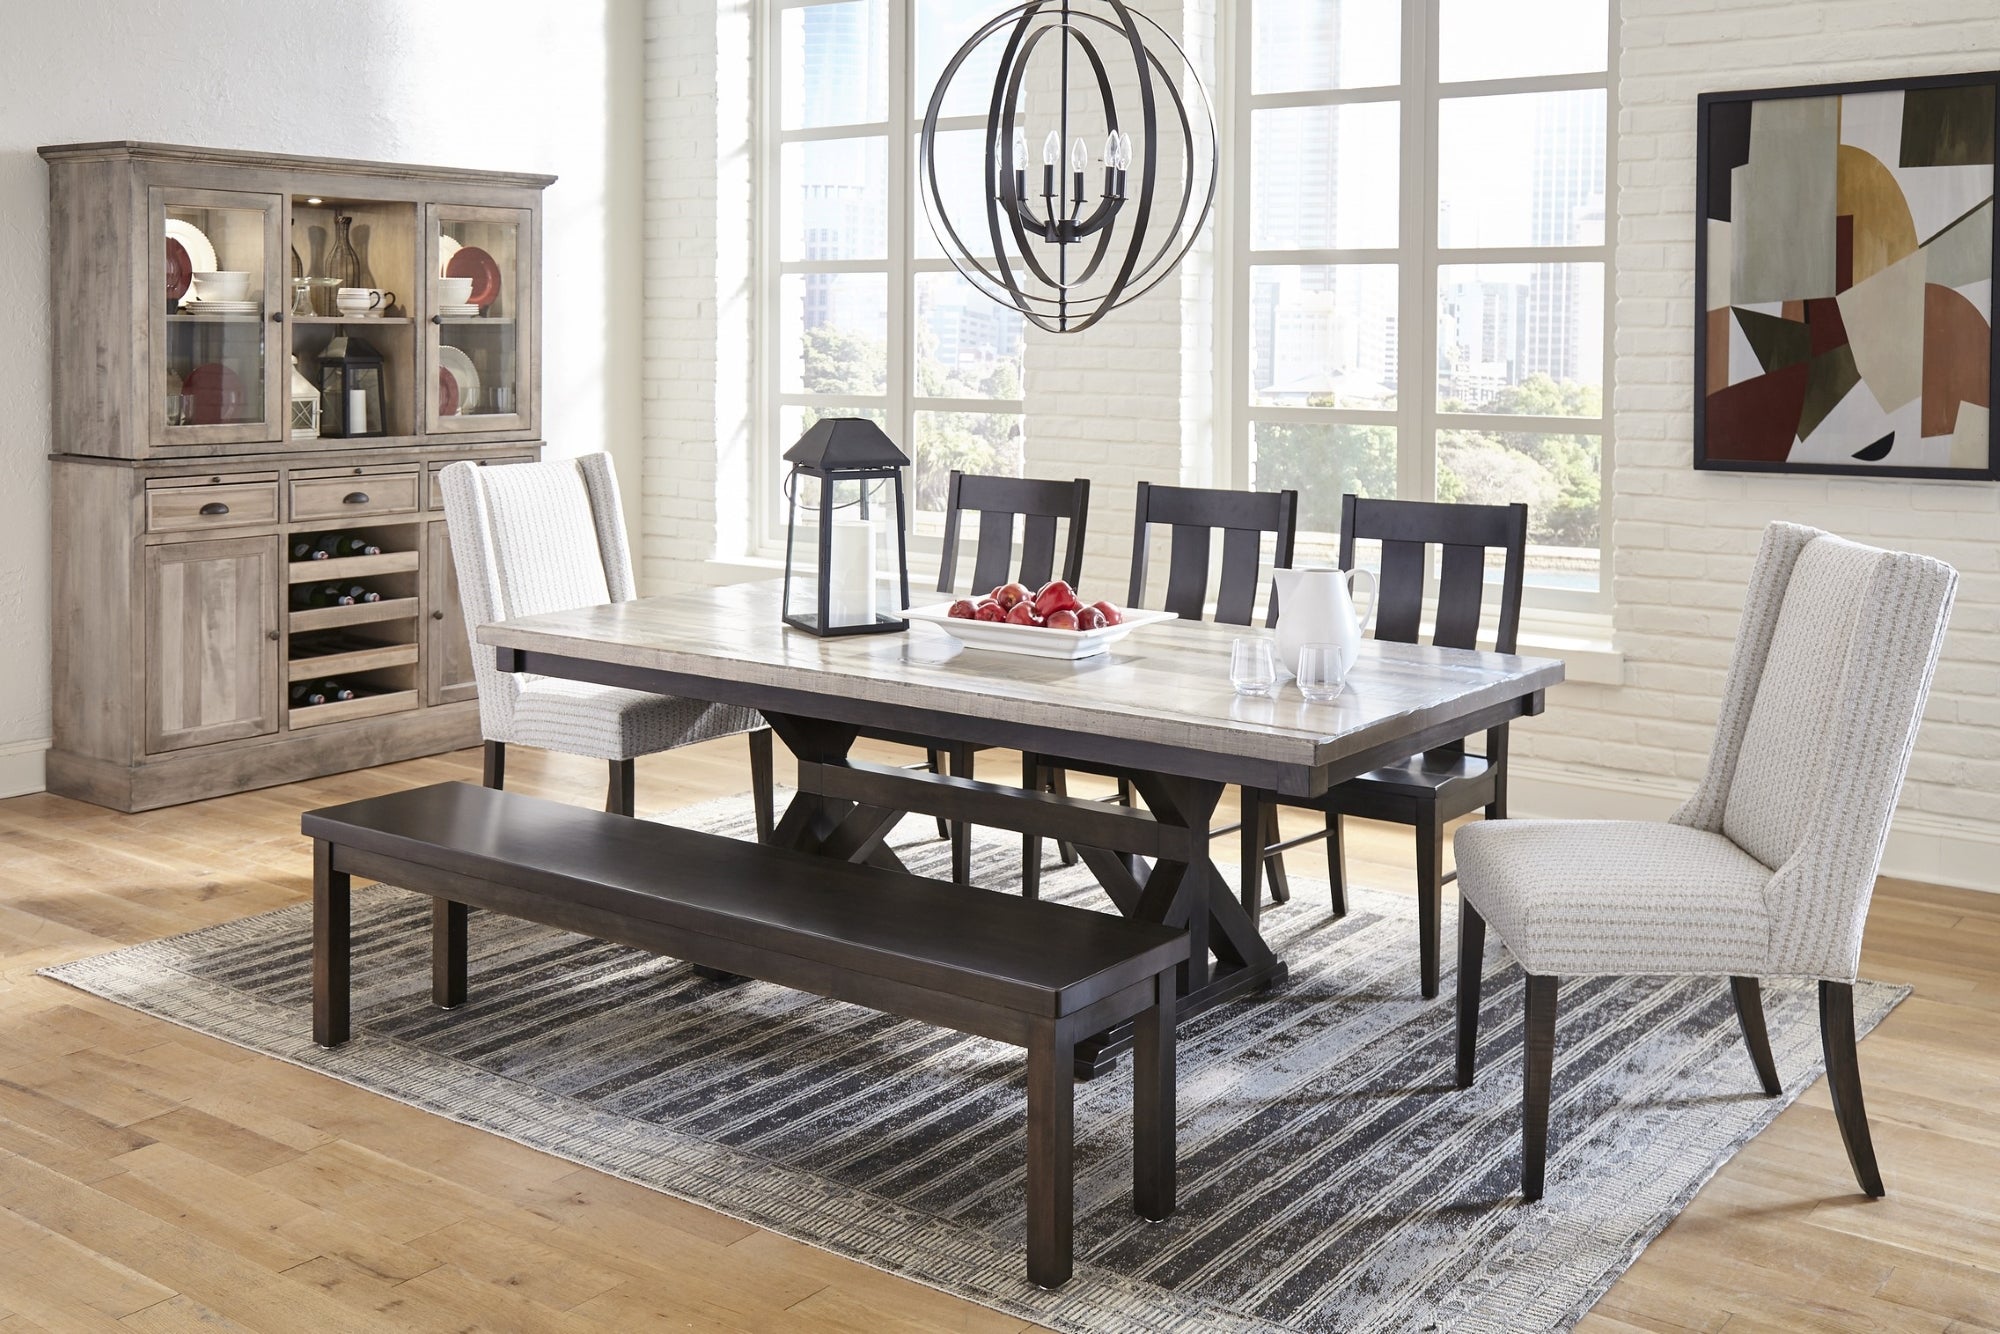 Farmhouse style dining room with a two-tone dining table, dark wood dining bench, and matching dining chairs.